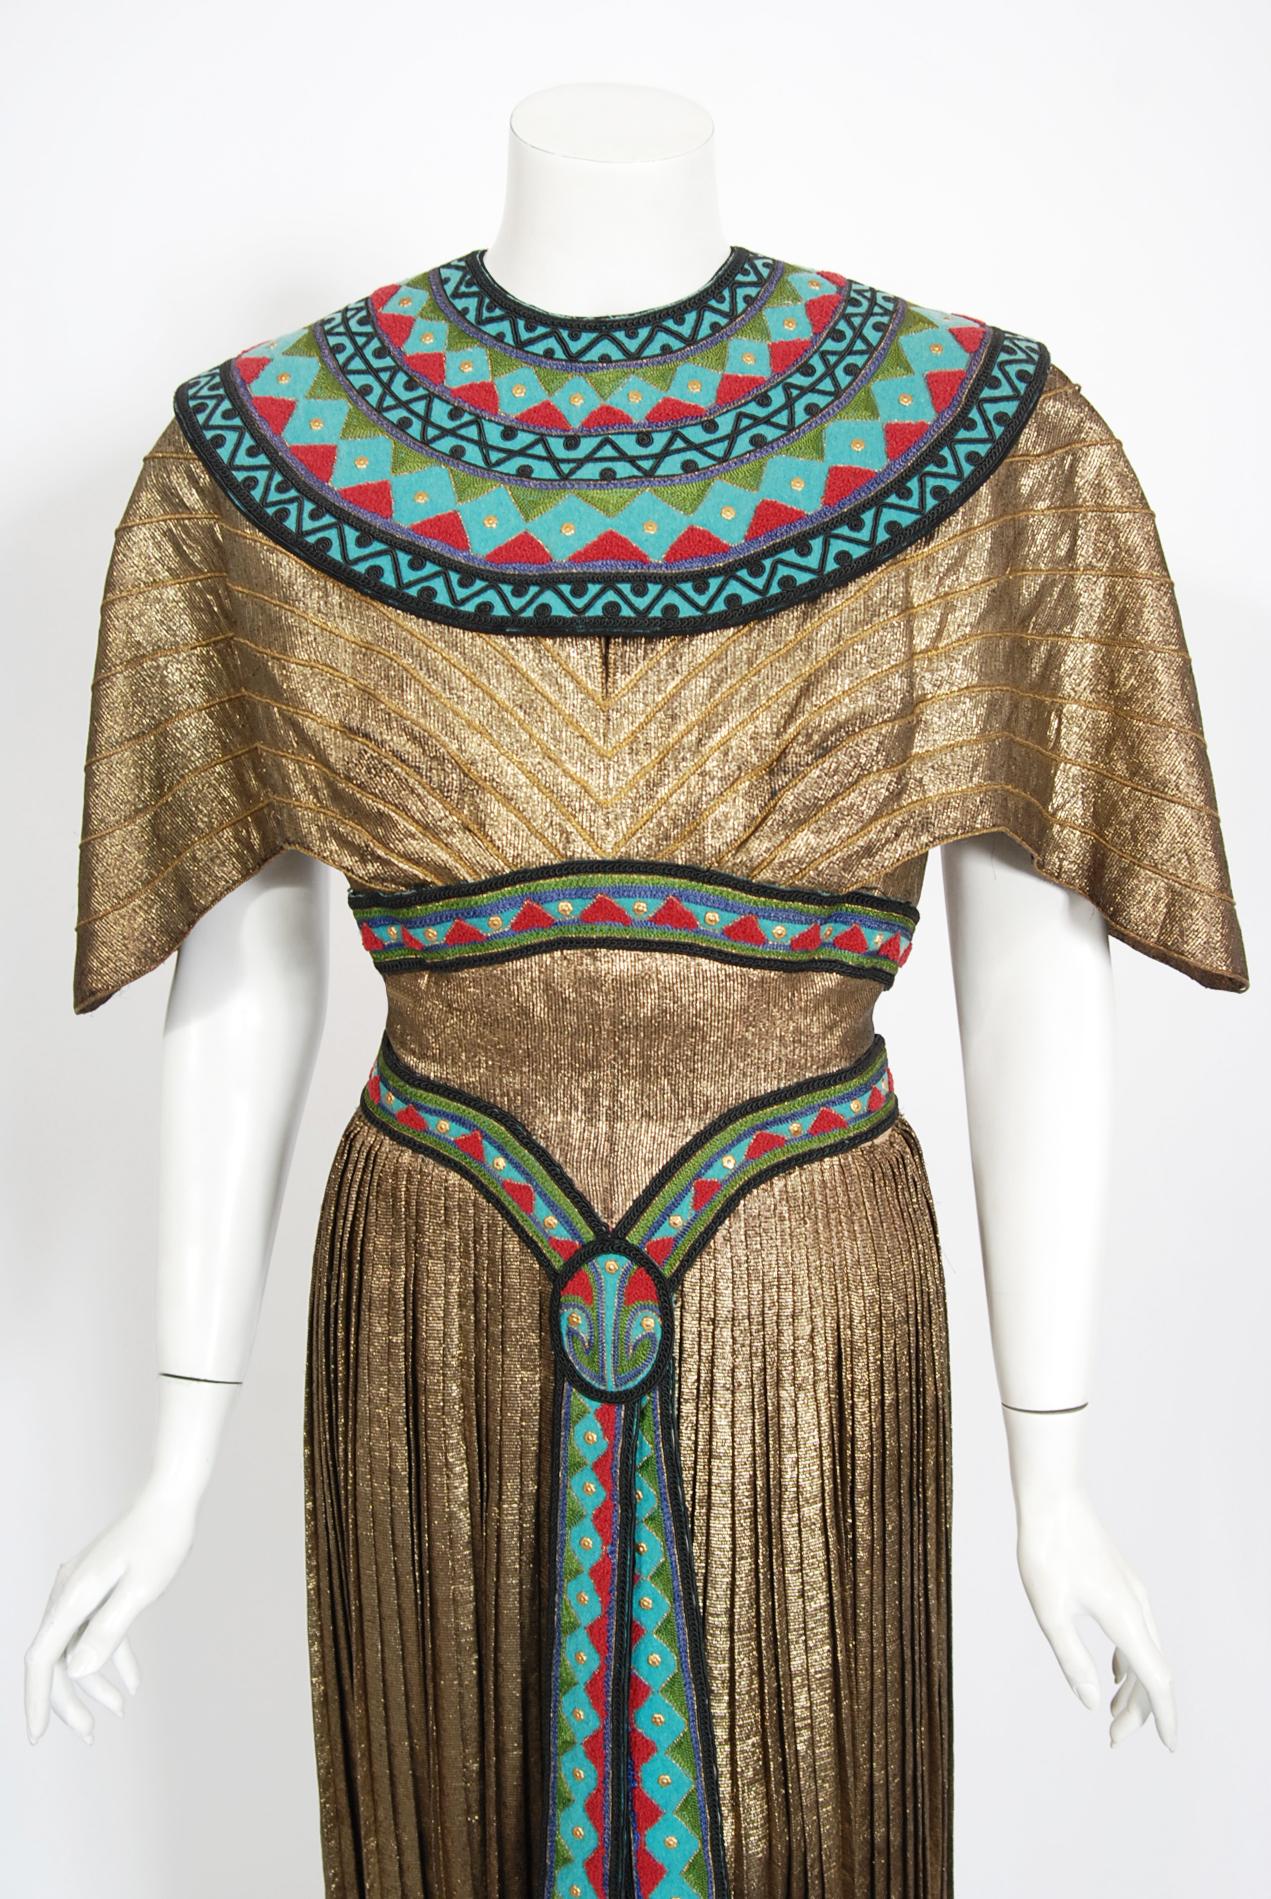 A breathtaking and truly one-of-a-kind metallic gold pleated lamé Egyptian novelty dress designed by Helen Rose for the MGM 1951 film 